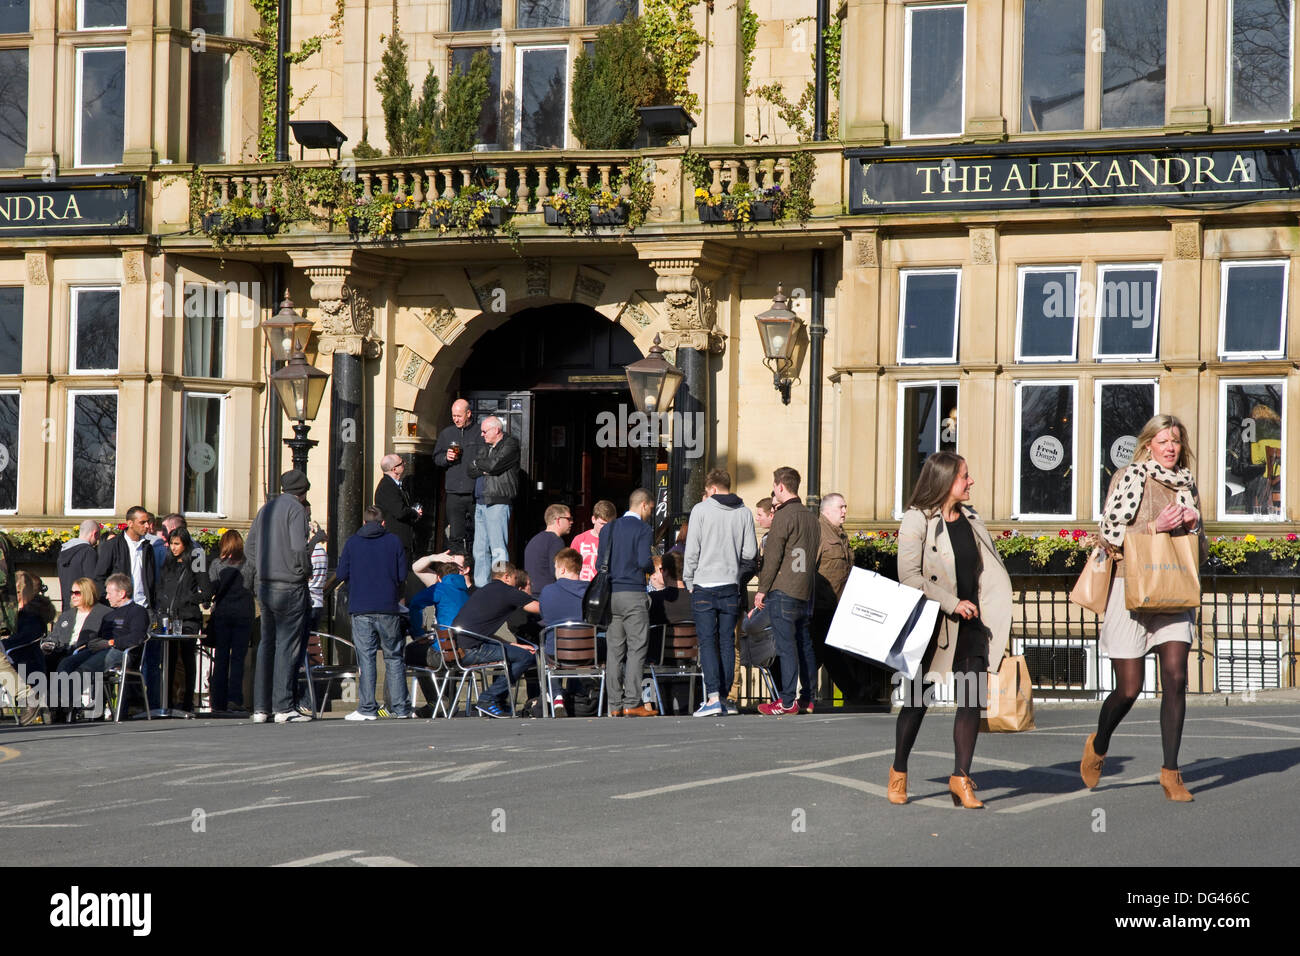 People drinking outside popular pub on saturday afternoon, The Alexandra, Prospect Place, Harrogate, North Yorkshire, England,UK Stock Photo